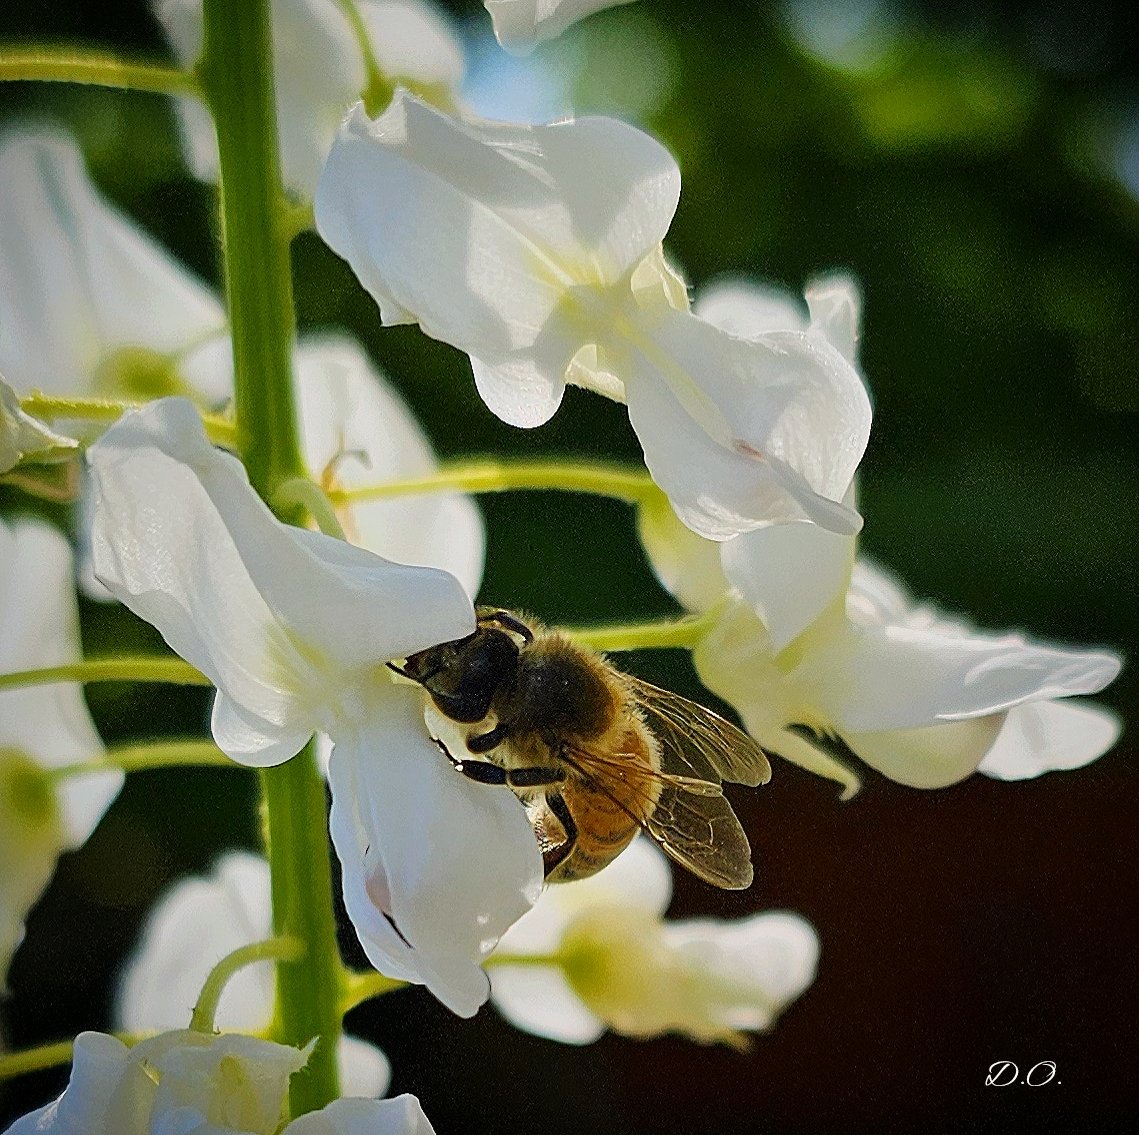 'Aerodynamically, the bumble bee shouldn't be able to fly, but the bumble bee doesn't know it so it goes on flying anyway' ~M.K. Ash
Keep doing what you love & forget what anyone says about it, k? Happy Monday xx
#photography #photographers #NaturePhotograhpy #bees
#MacroMonday